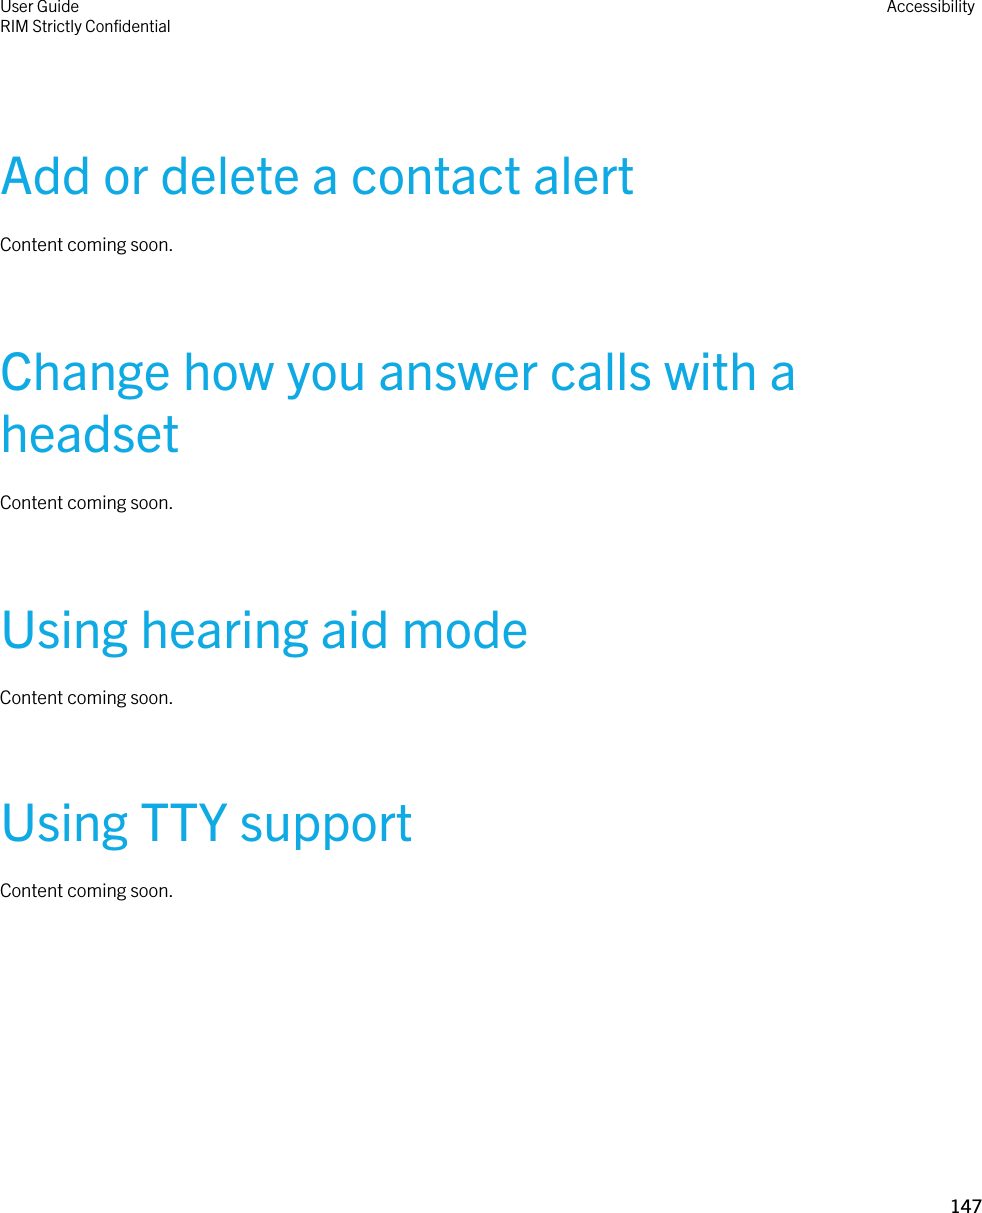 Add or delete a contact alertContent coming soon.Change how you answer calls with a headsetContent coming soon.Using hearing aid modeContent coming soon.Using TTY supportContent coming soon.User GuideRIM Strictly Confidential Accessibility147 